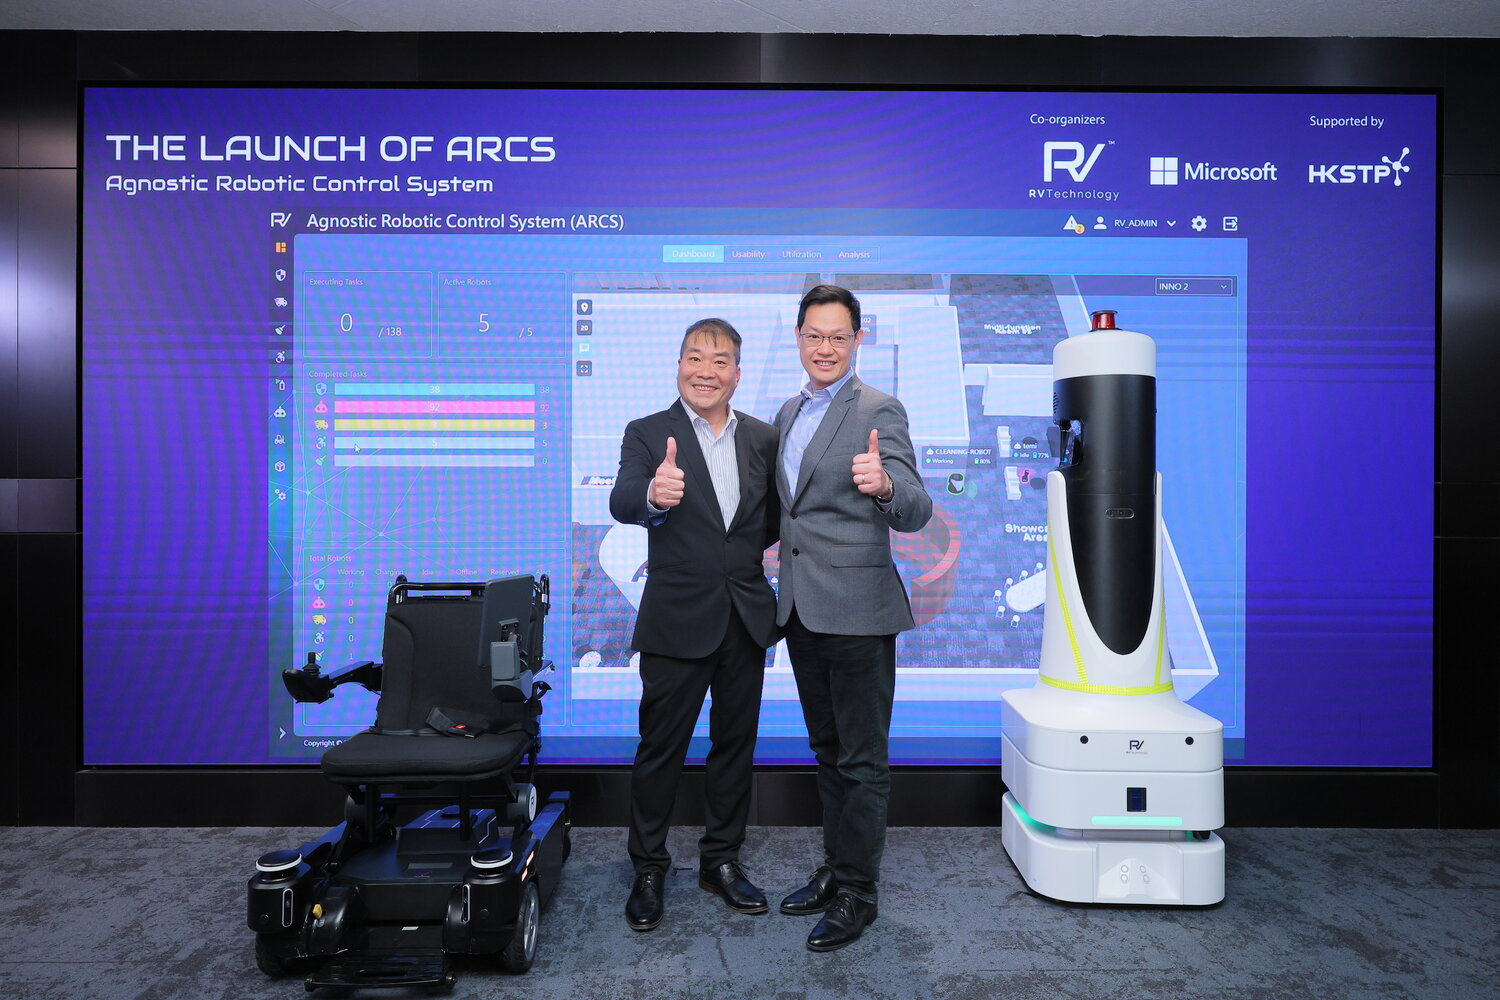 rsz_rio_chau_ceo_of_rv_technology_left_together_with_kelvin_tse_director_for_global_partner_solution_at_microsoft_hong_kong_right_introduced_the_function_and_application_of_arcs